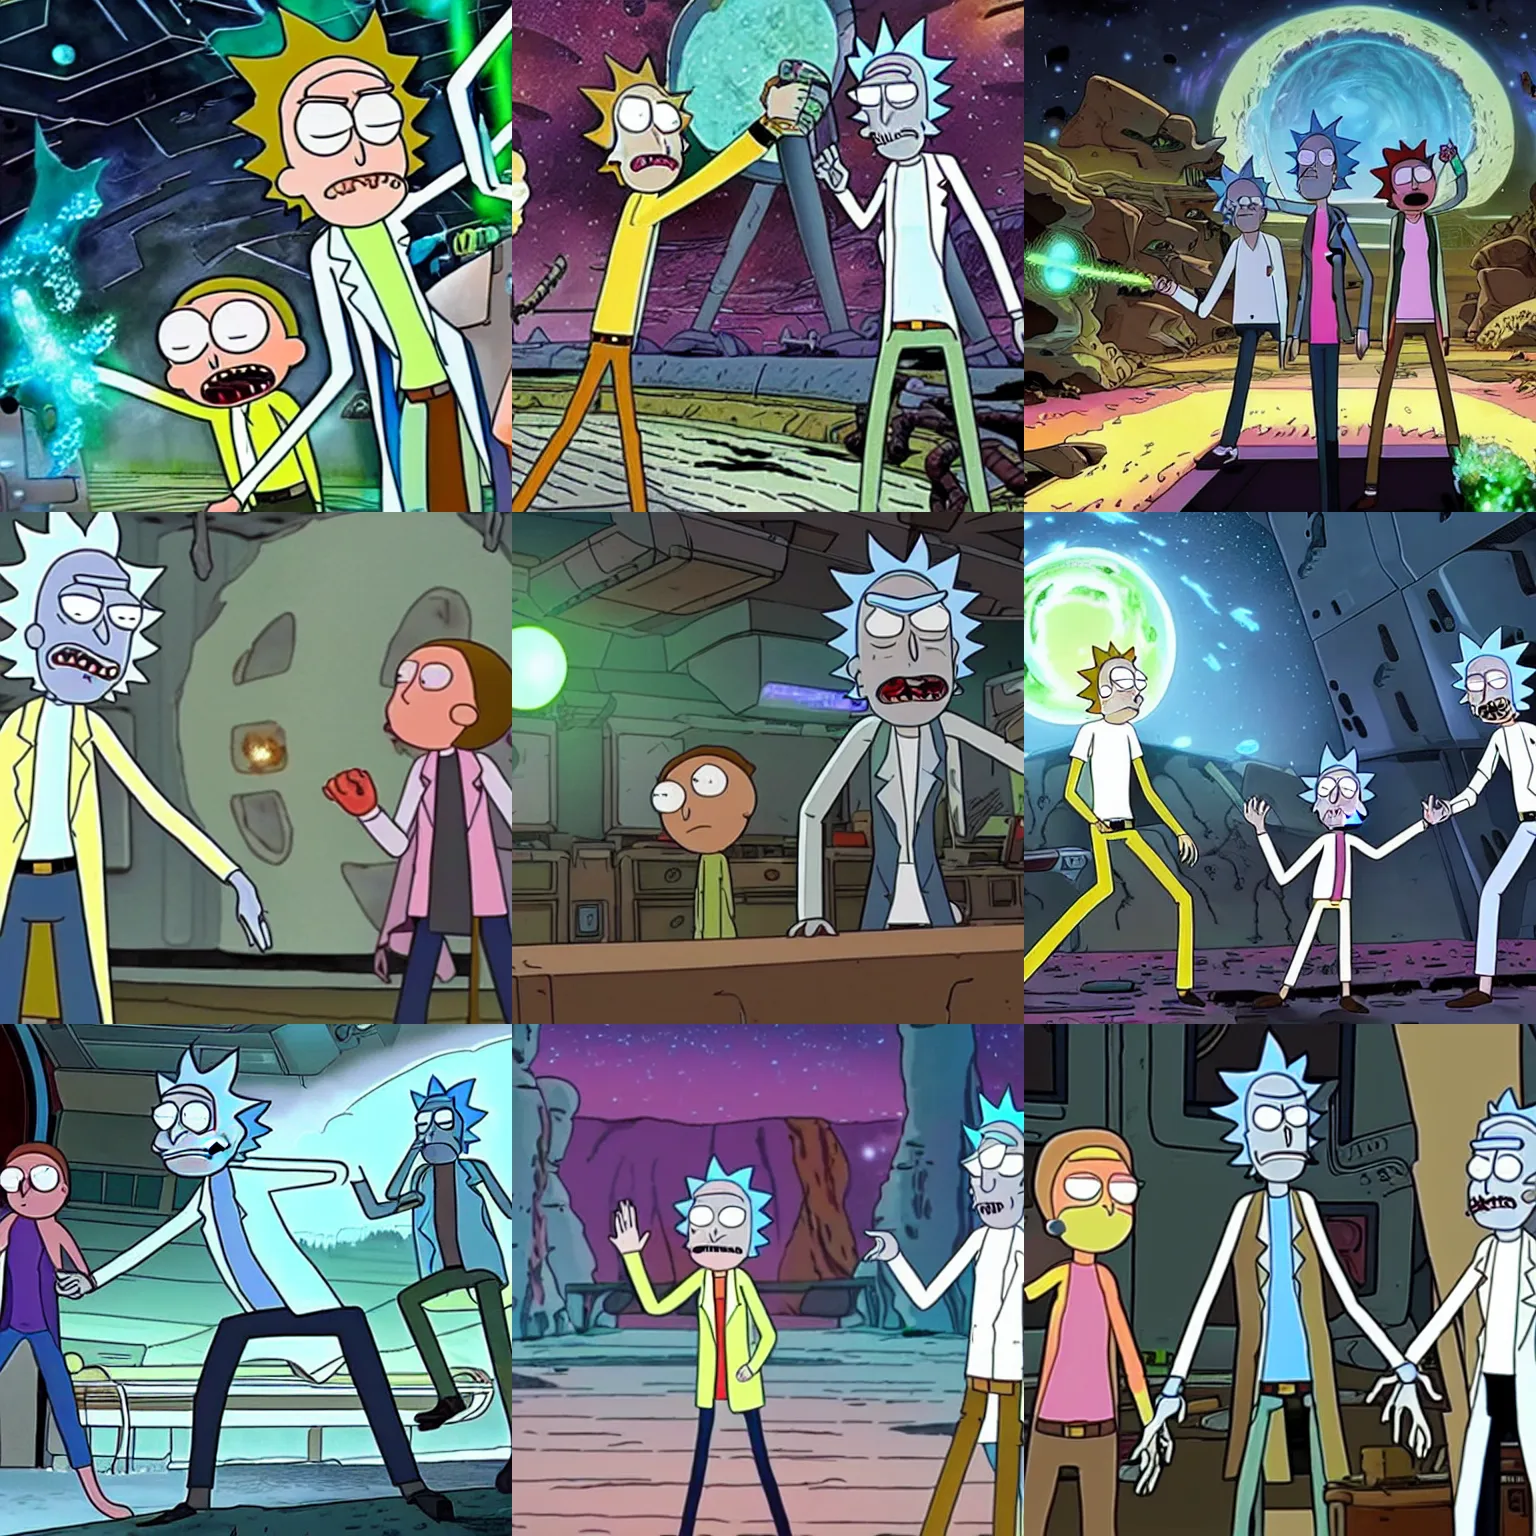 Prompt: Rick and morty fight the borg in live action sci-Fi film. Production still.